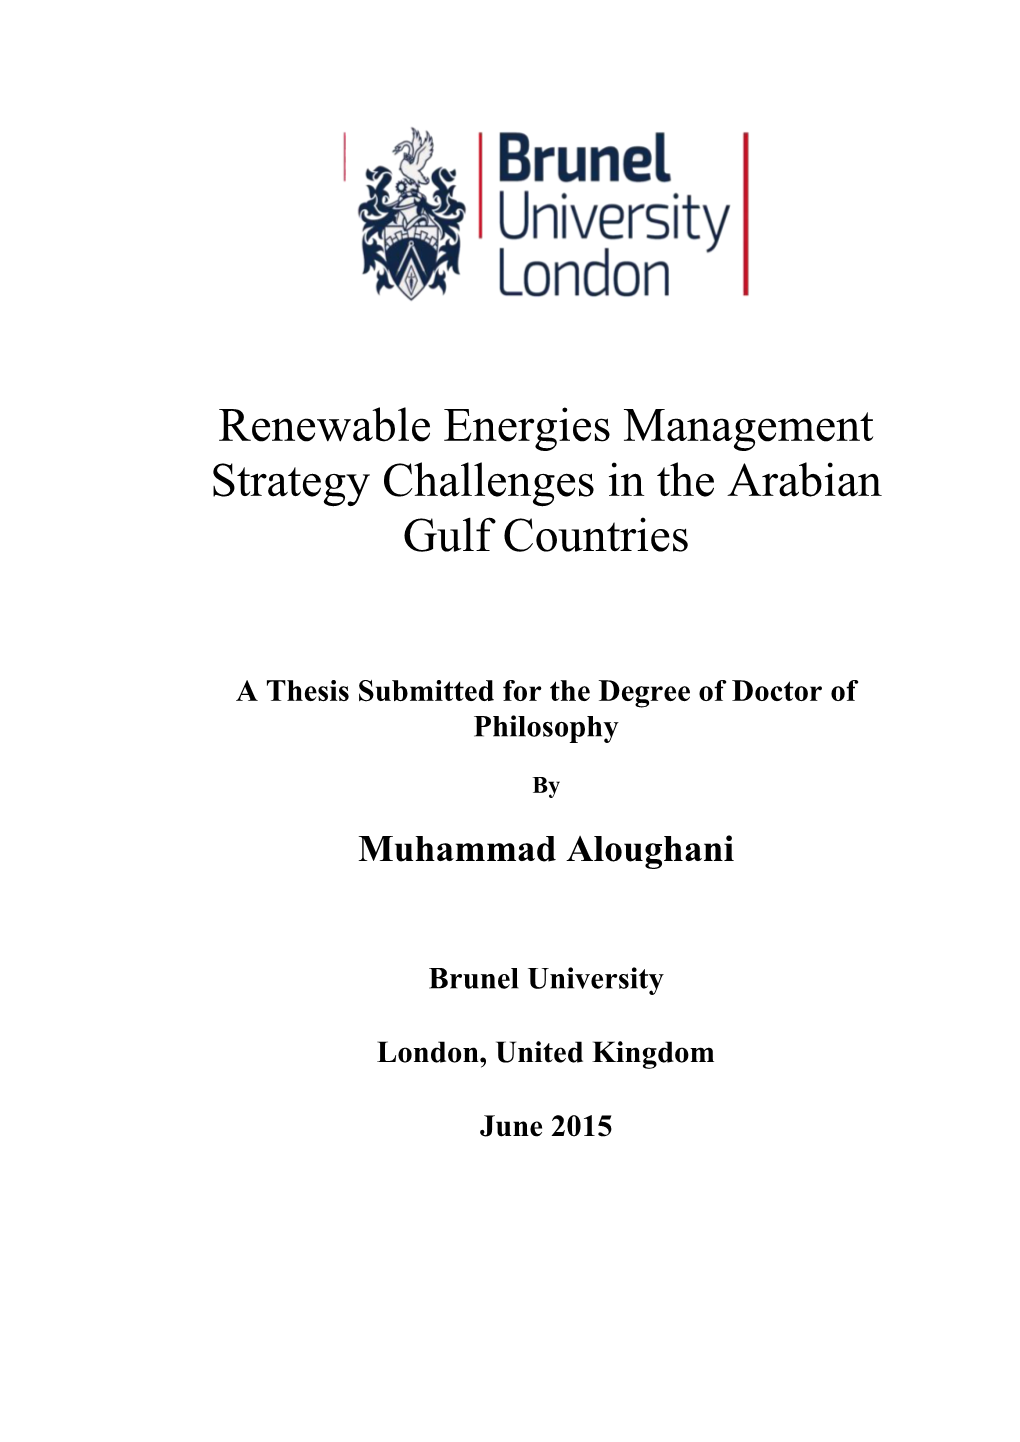 Renewable Energies Management Strategy Challenges in the Arabian Gulf Countries